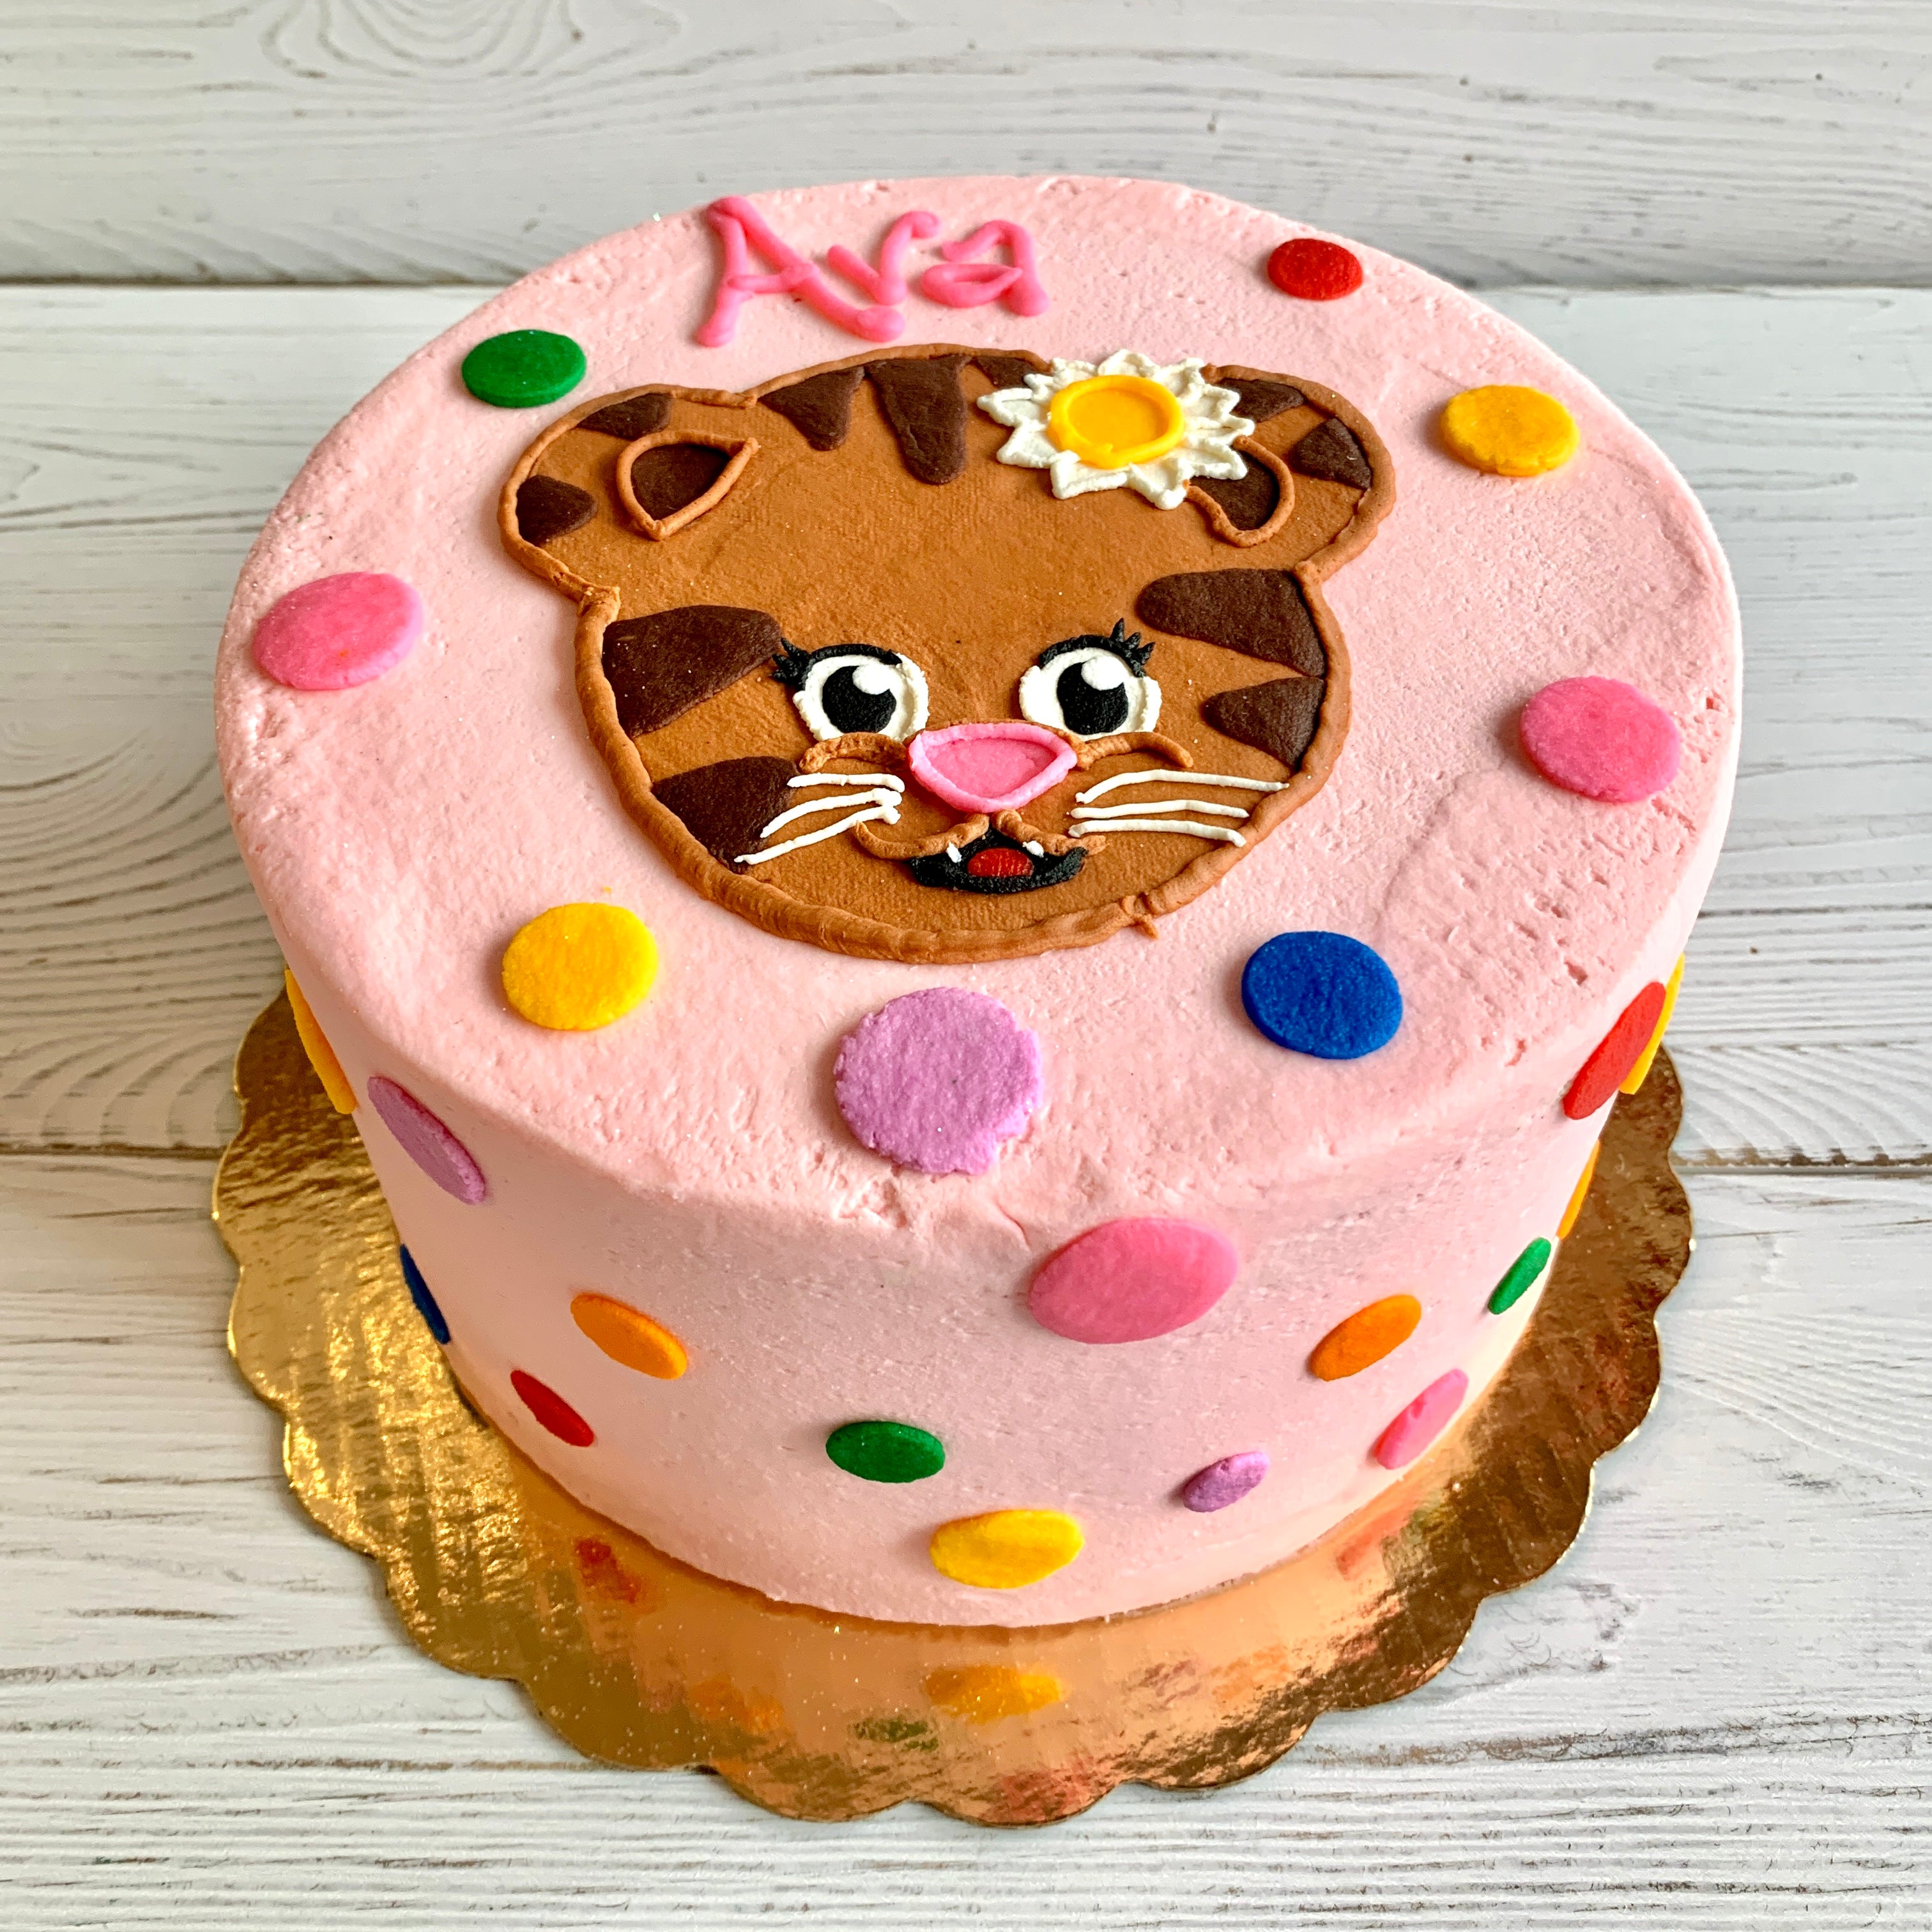 Sculpted Tiger cake buttercream cake / tiger fondant cake / tiger cupcakes,  Food & Drinks, Homemade Bakes on Carousell